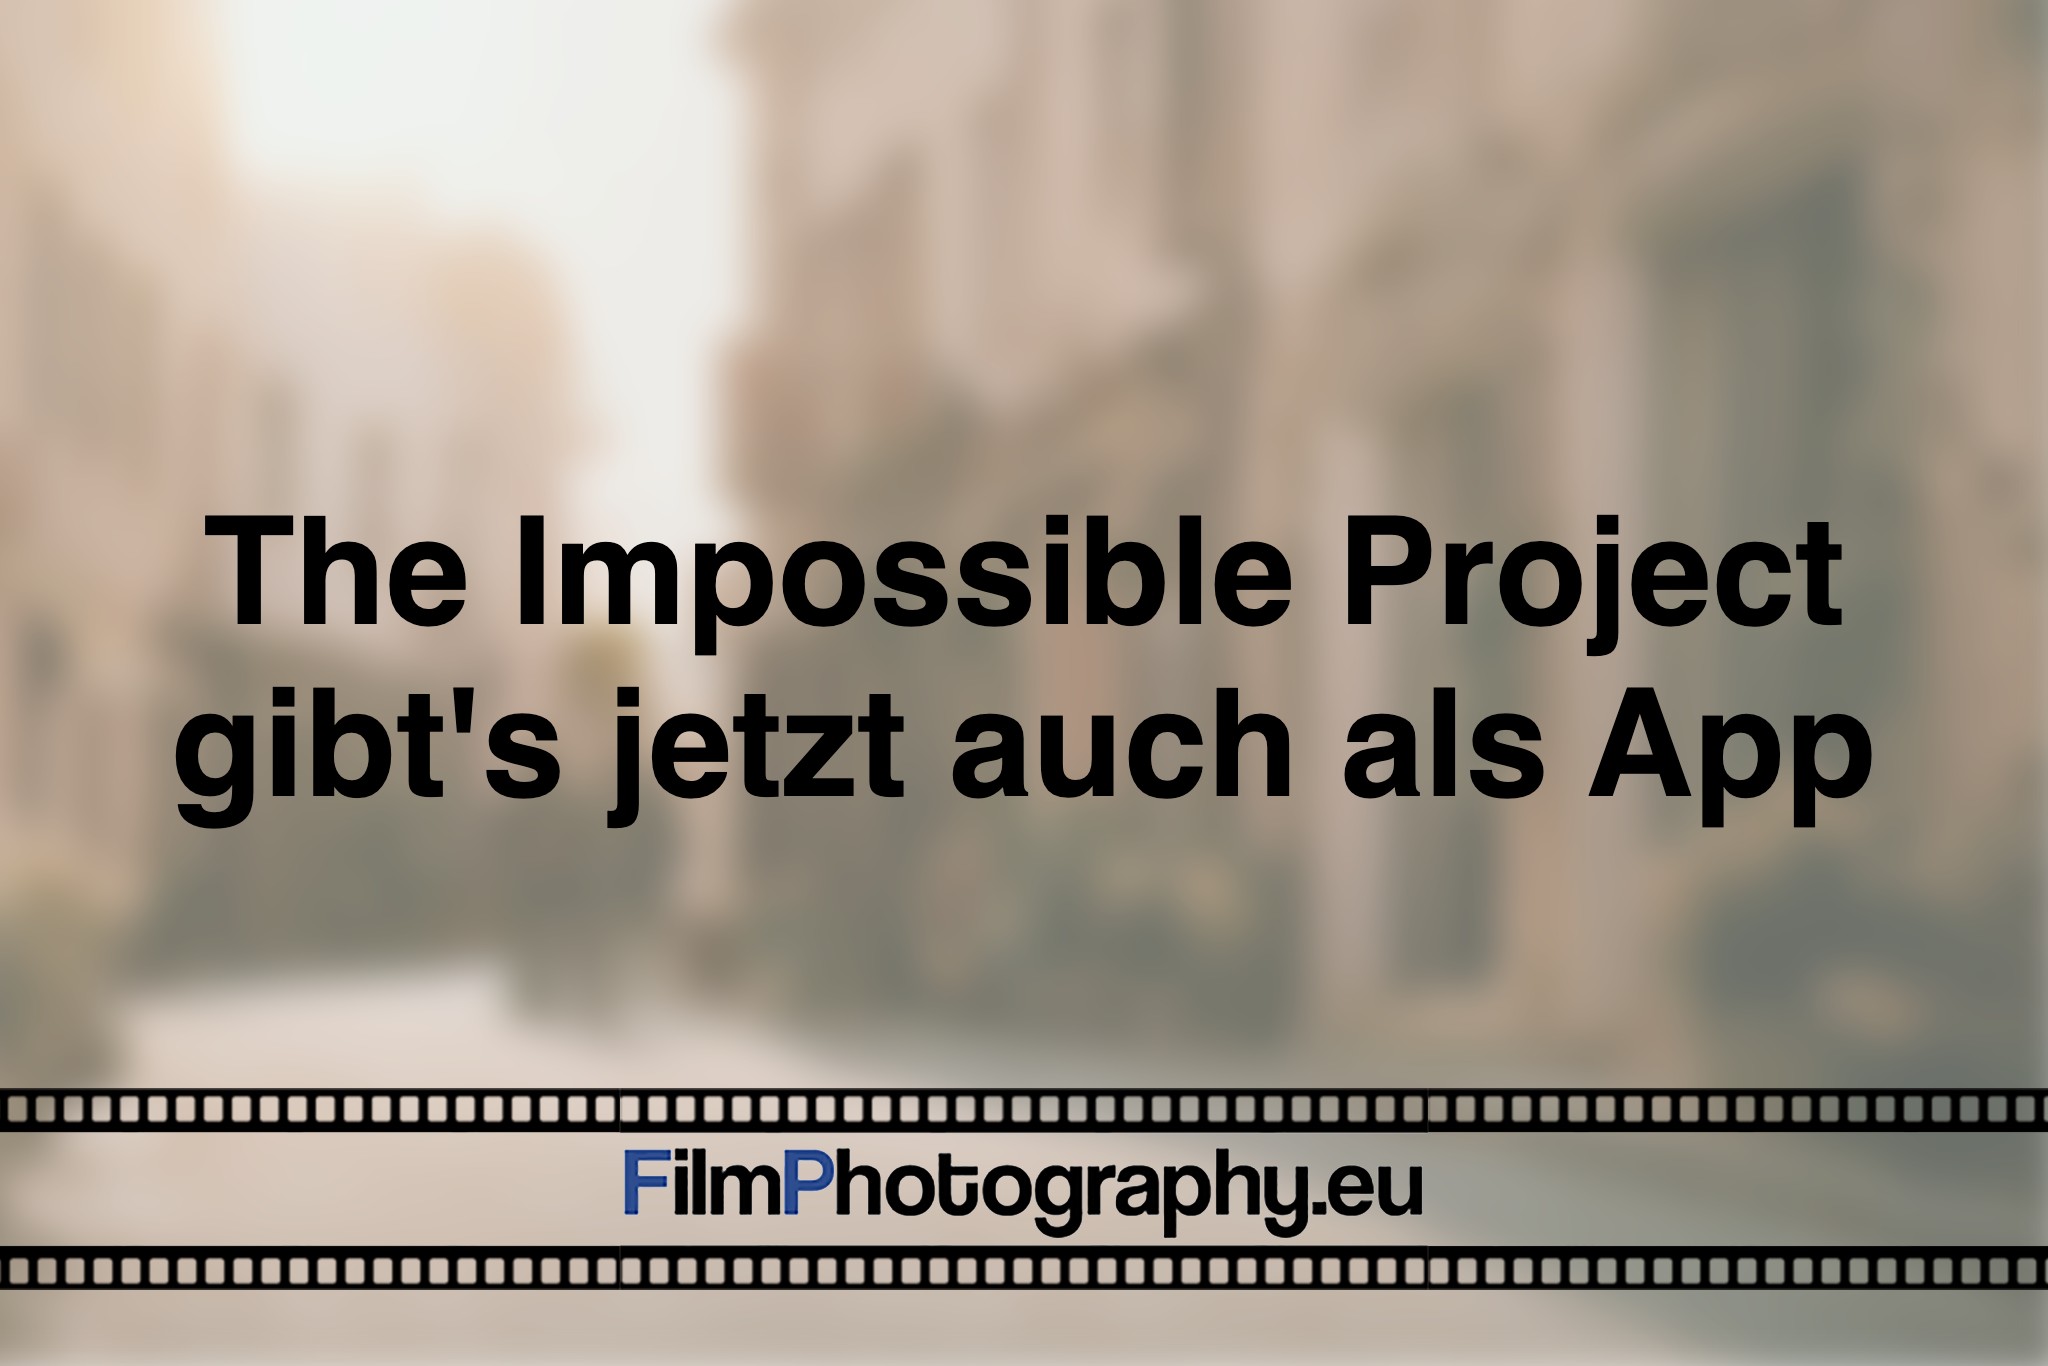 the-impossible-project-gibt's-jetzt-auch-als-app-photo-bnv